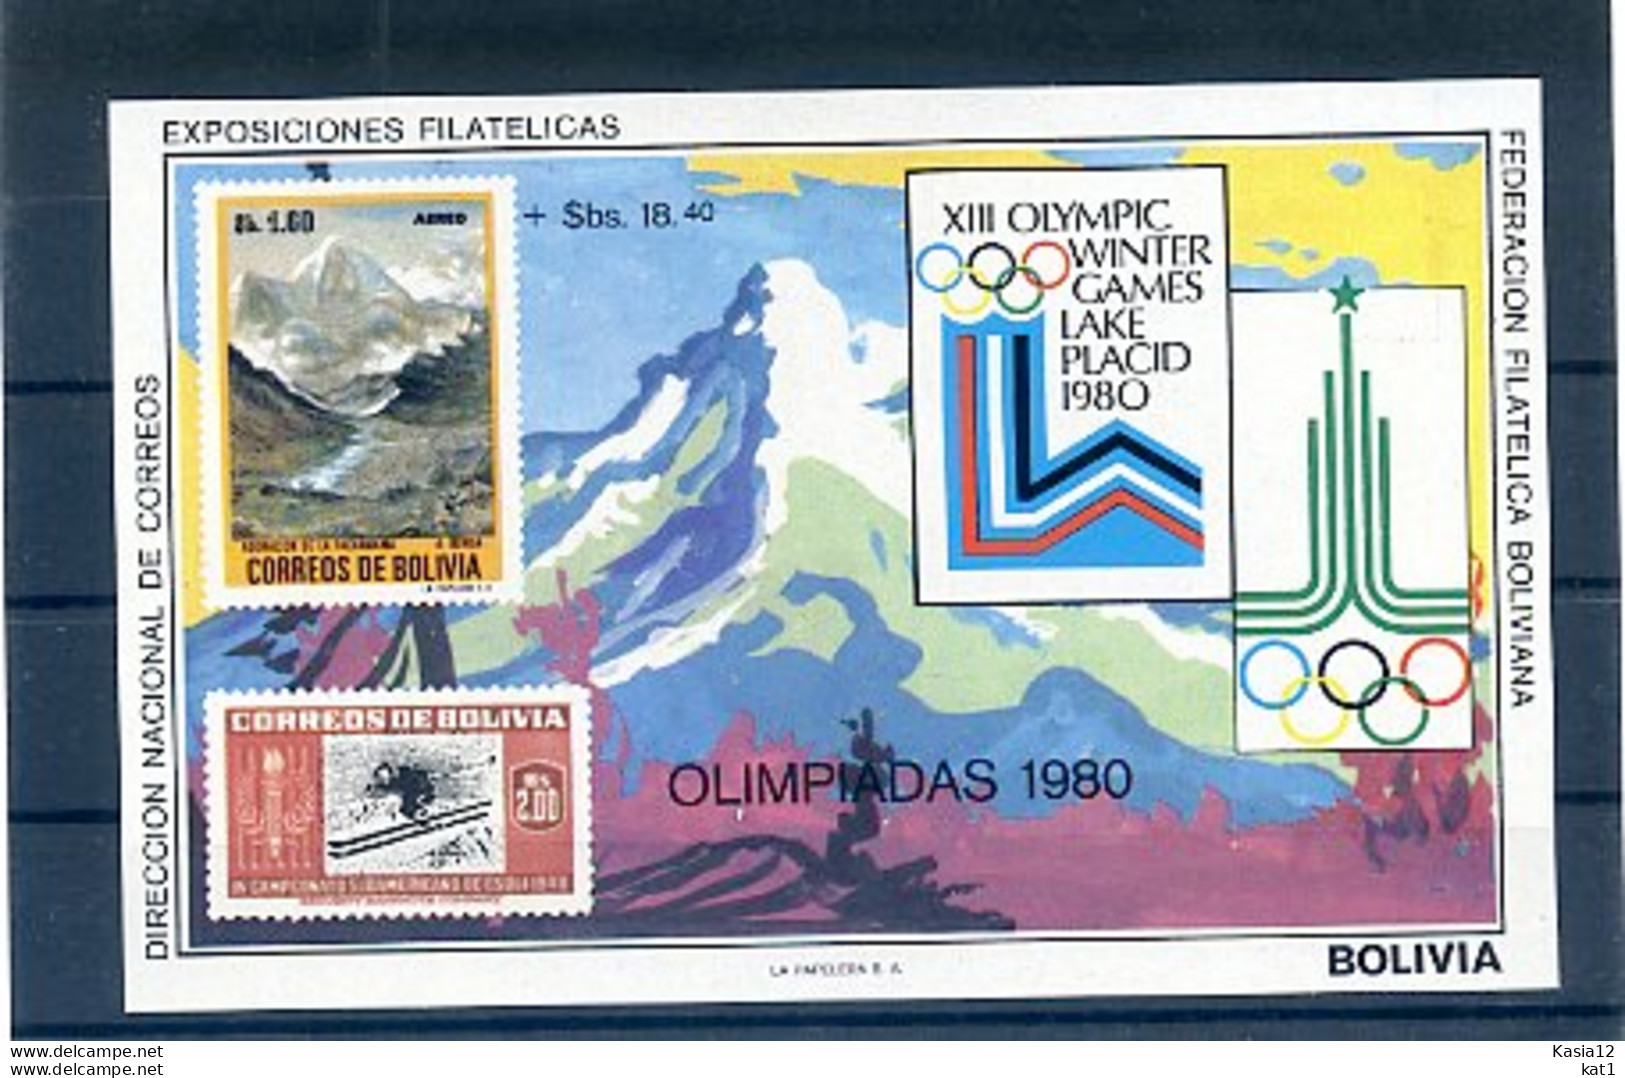 A20404)Olympia 80: Bolivien Bl 88** - Winter 1980: Lake Placid